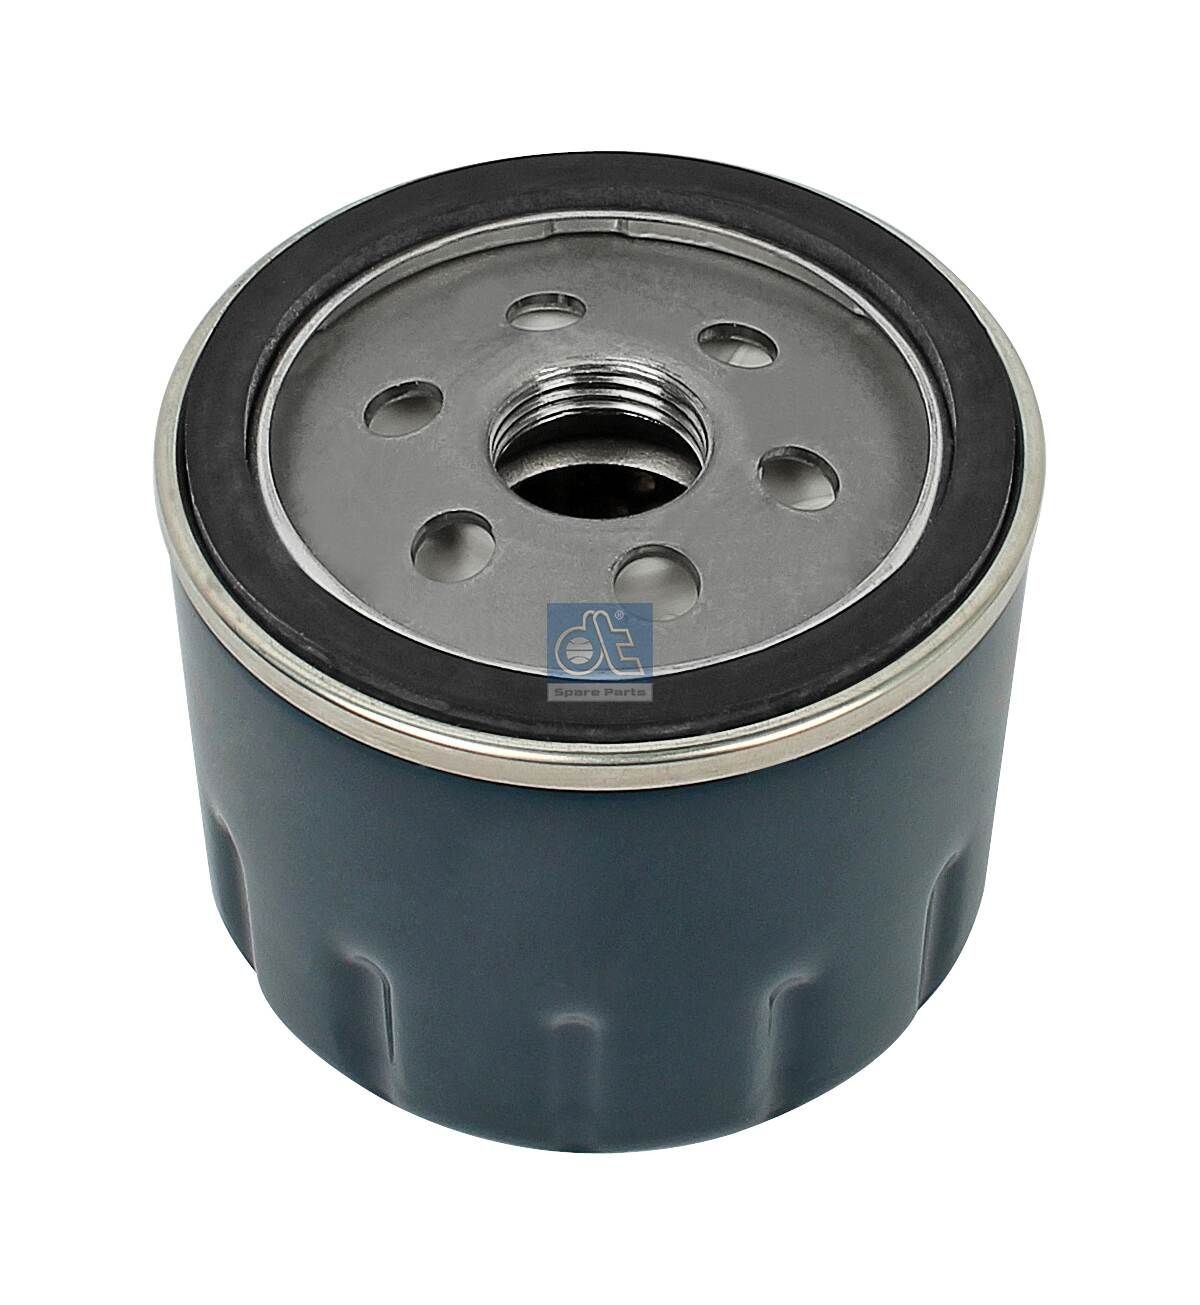 DT Spare Parts 6.24213 Oil filter SUZUKI experience and price